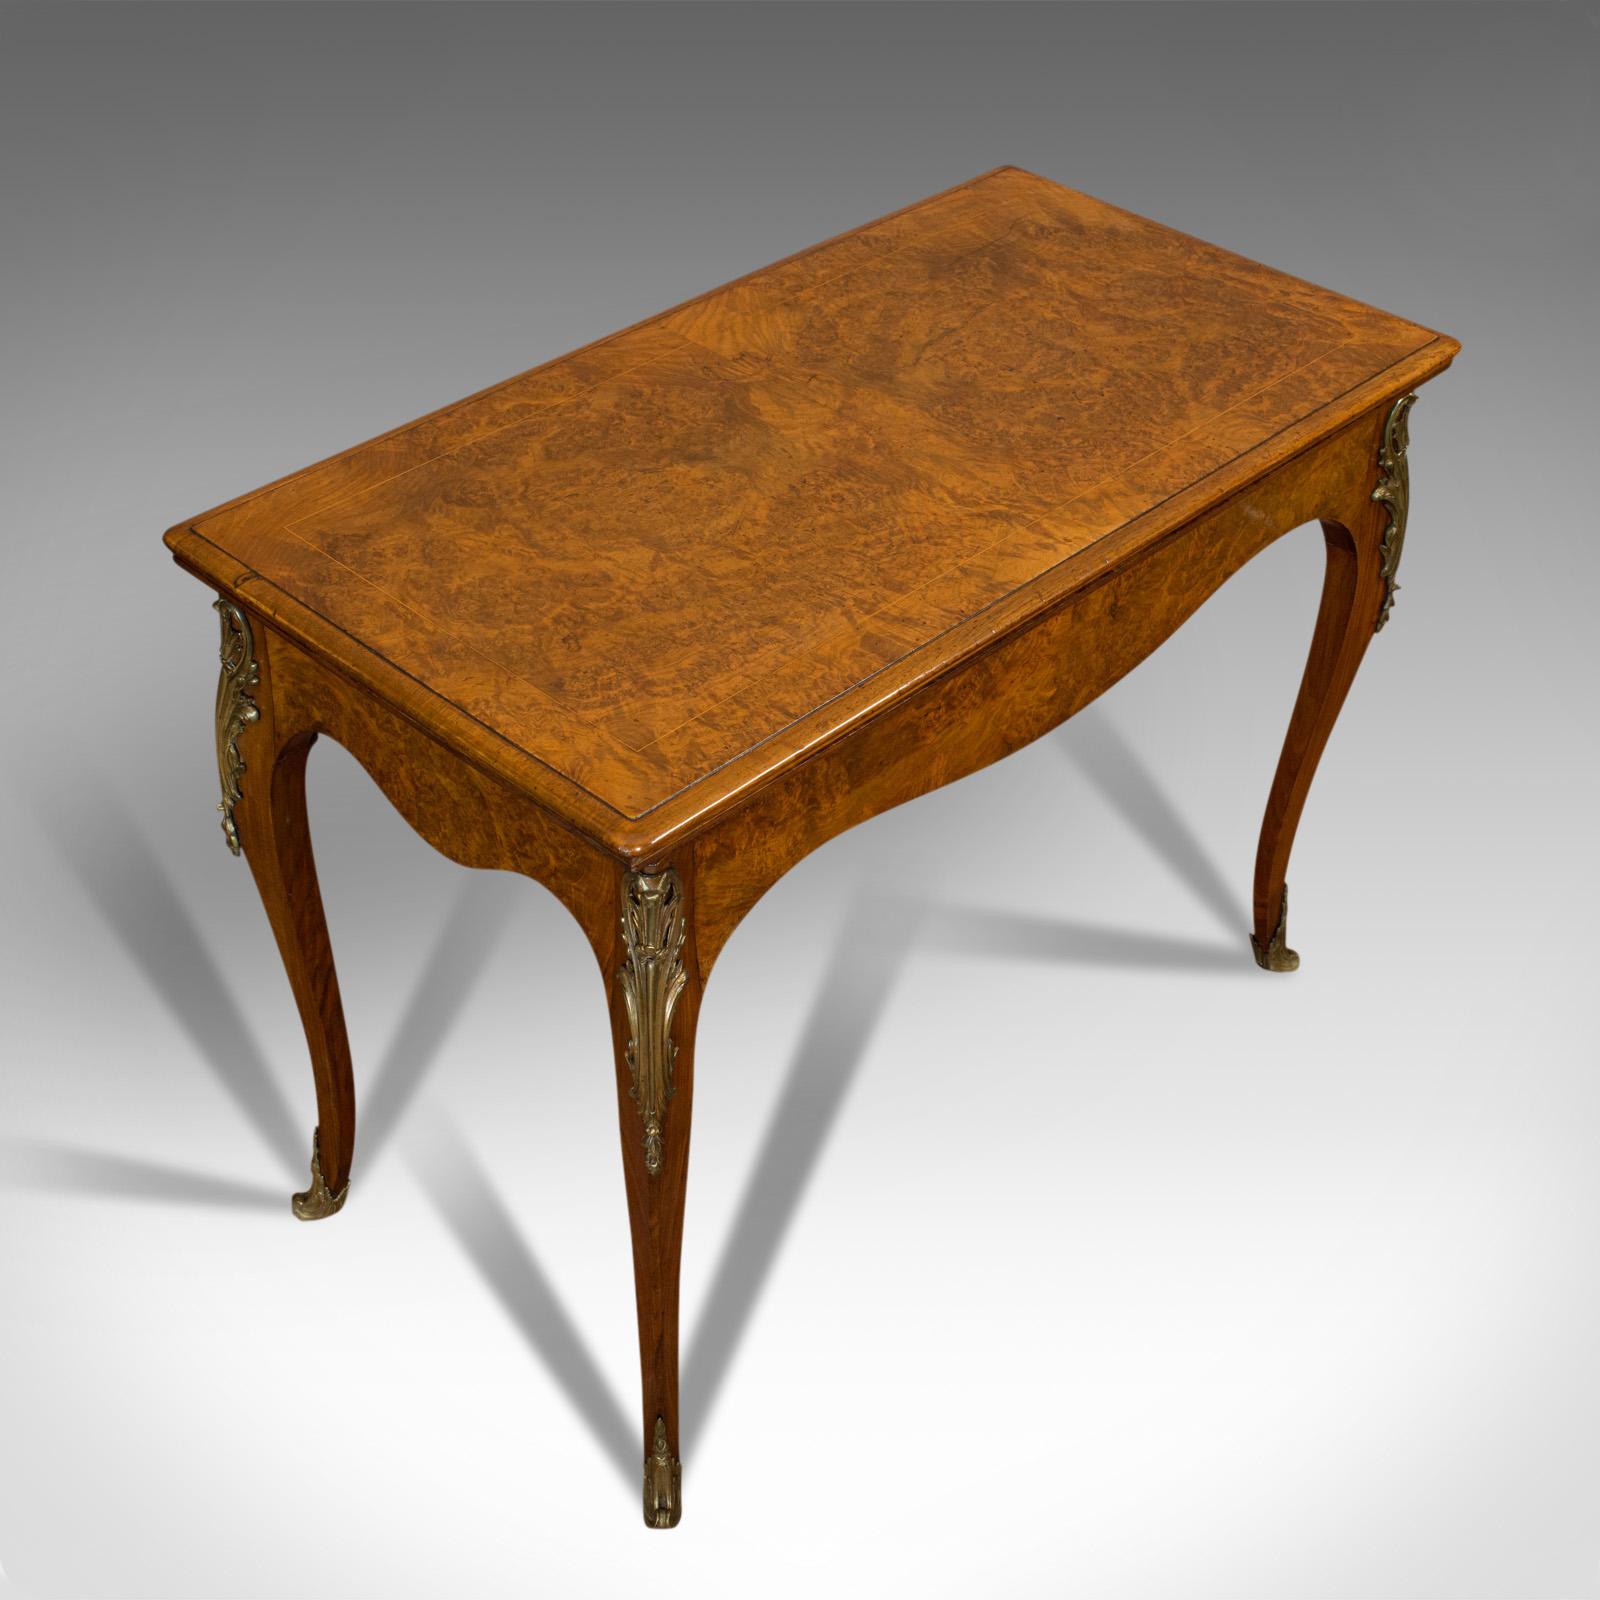 19th Century Antique Card Table, French, Burr Walnut, Fold over, Games, Victorian, circa 1870 For Sale